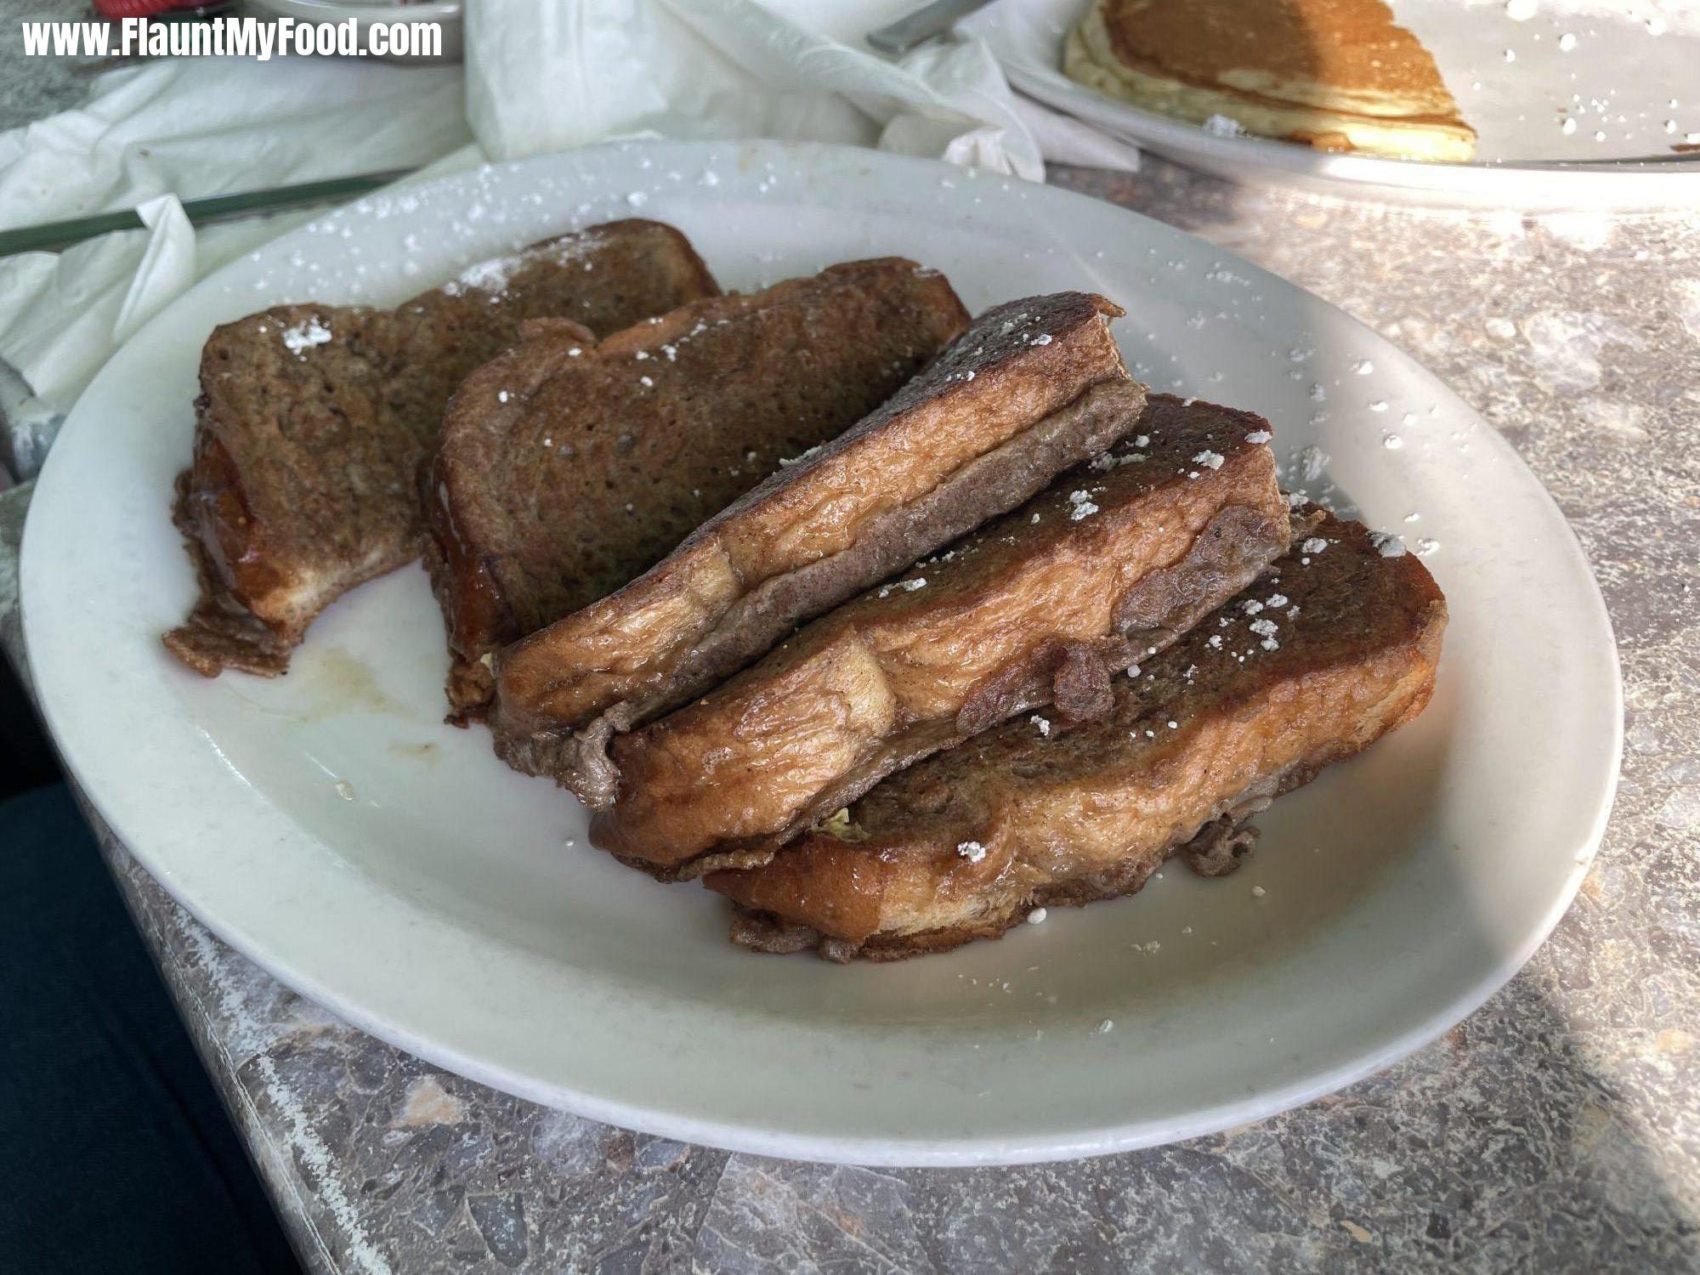 Coconut French toast from rod and reel pier restaurantThis is my delicious coconut French toast from the rod and reel pier café where I had breakfast the other day on Annamaria Island located in Florida and just north of longboat key Florida.